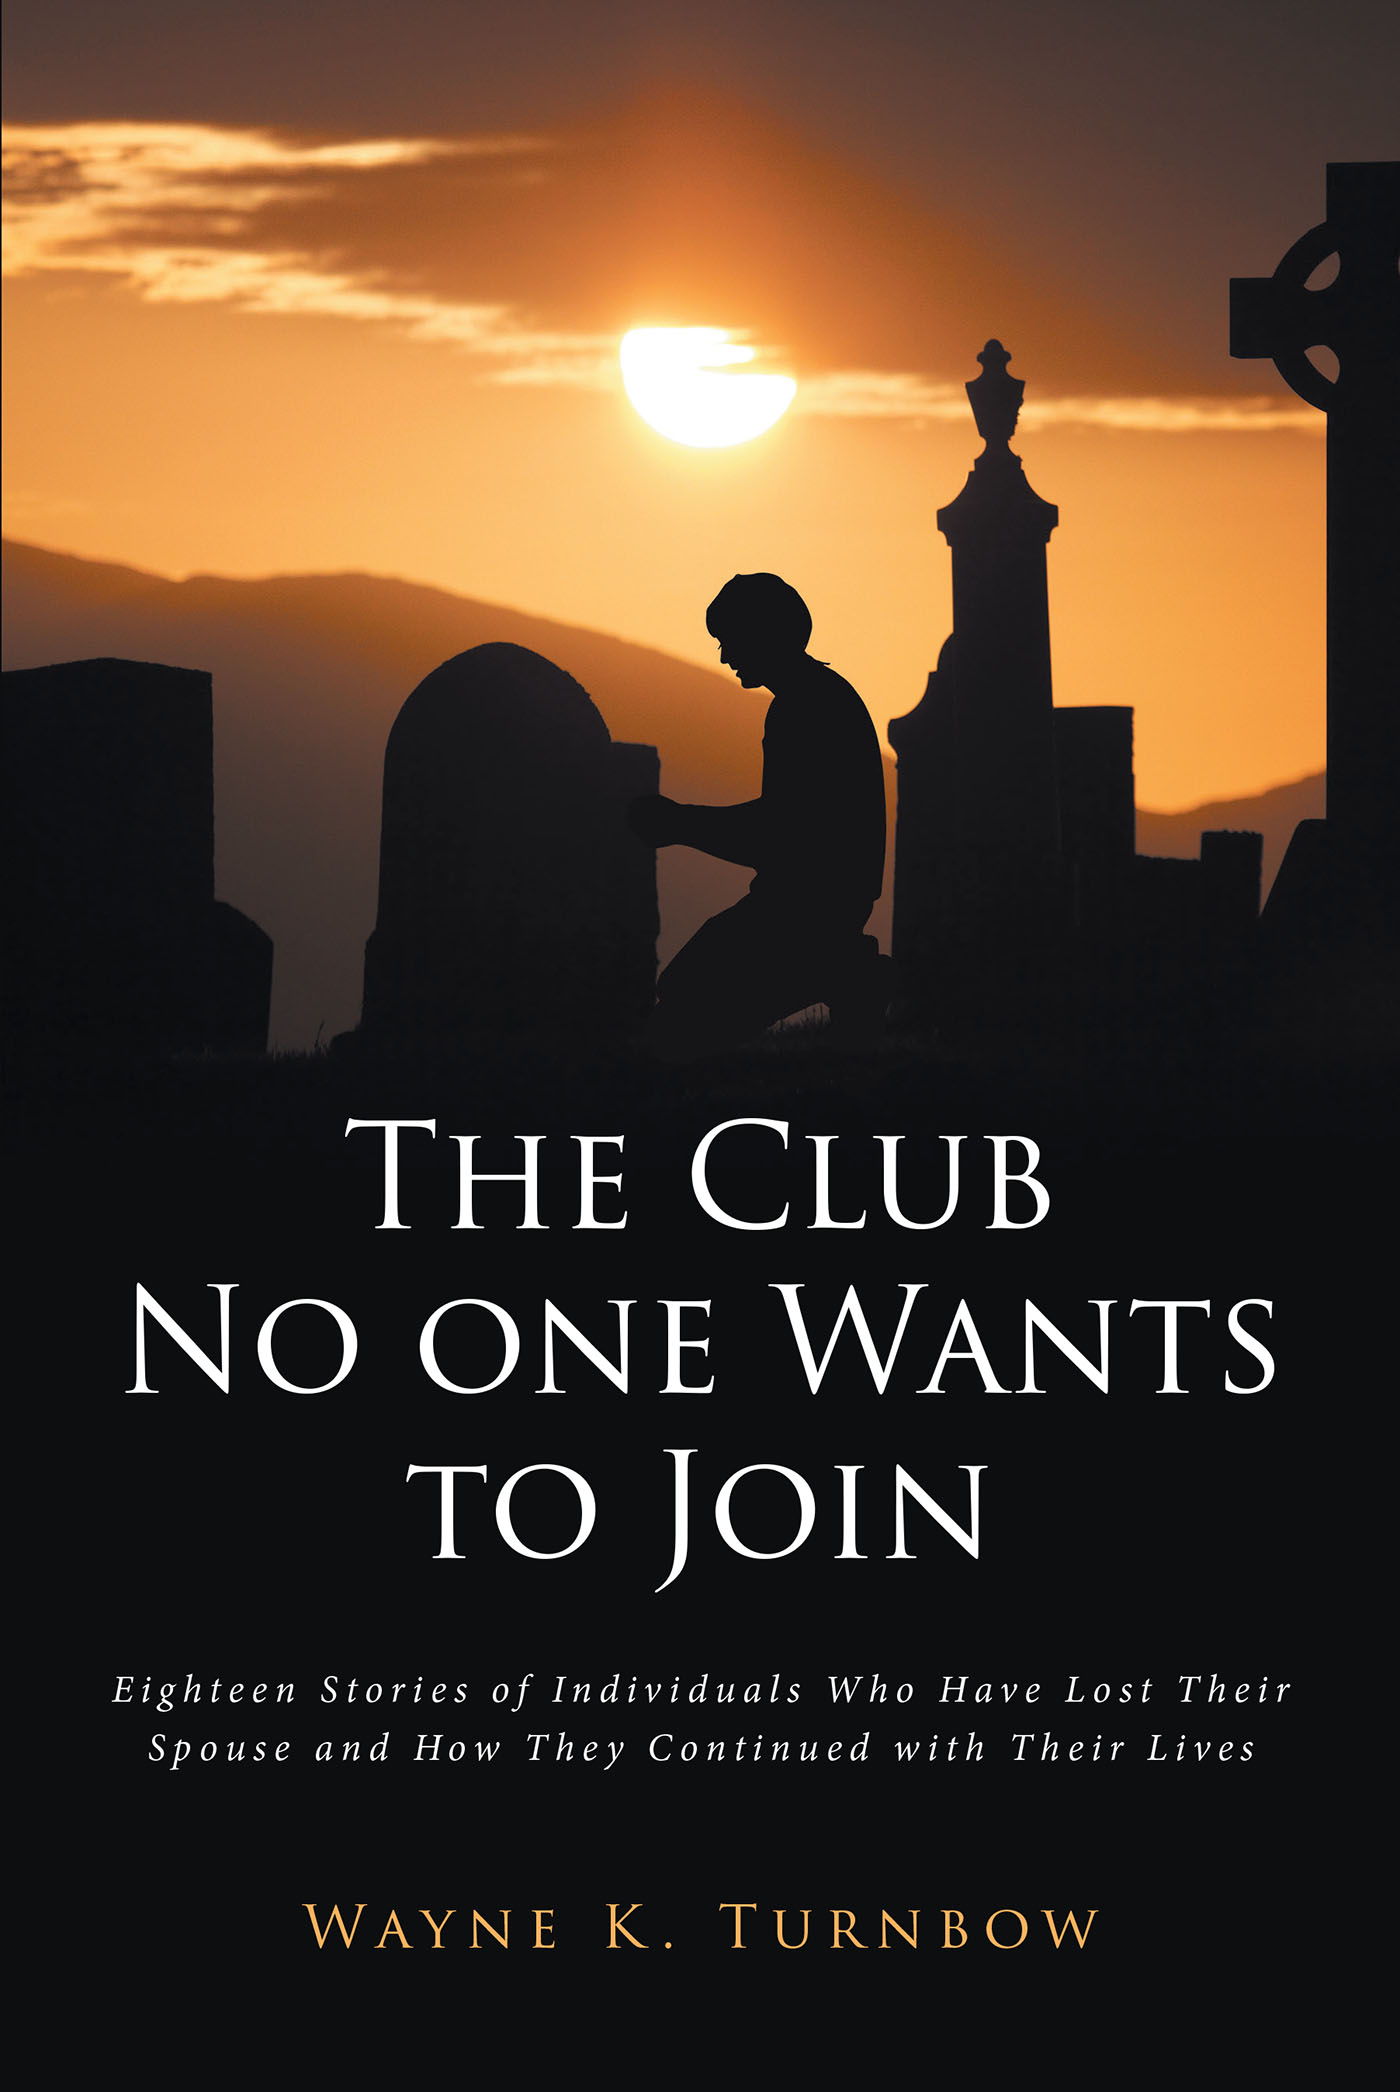 Author Wayne K. Turnbow’s New Book, "The Club No one Wants to Join," Shares the Very Personal Stories of Eighteen People Who Lost Their Spouses and Had to Move on